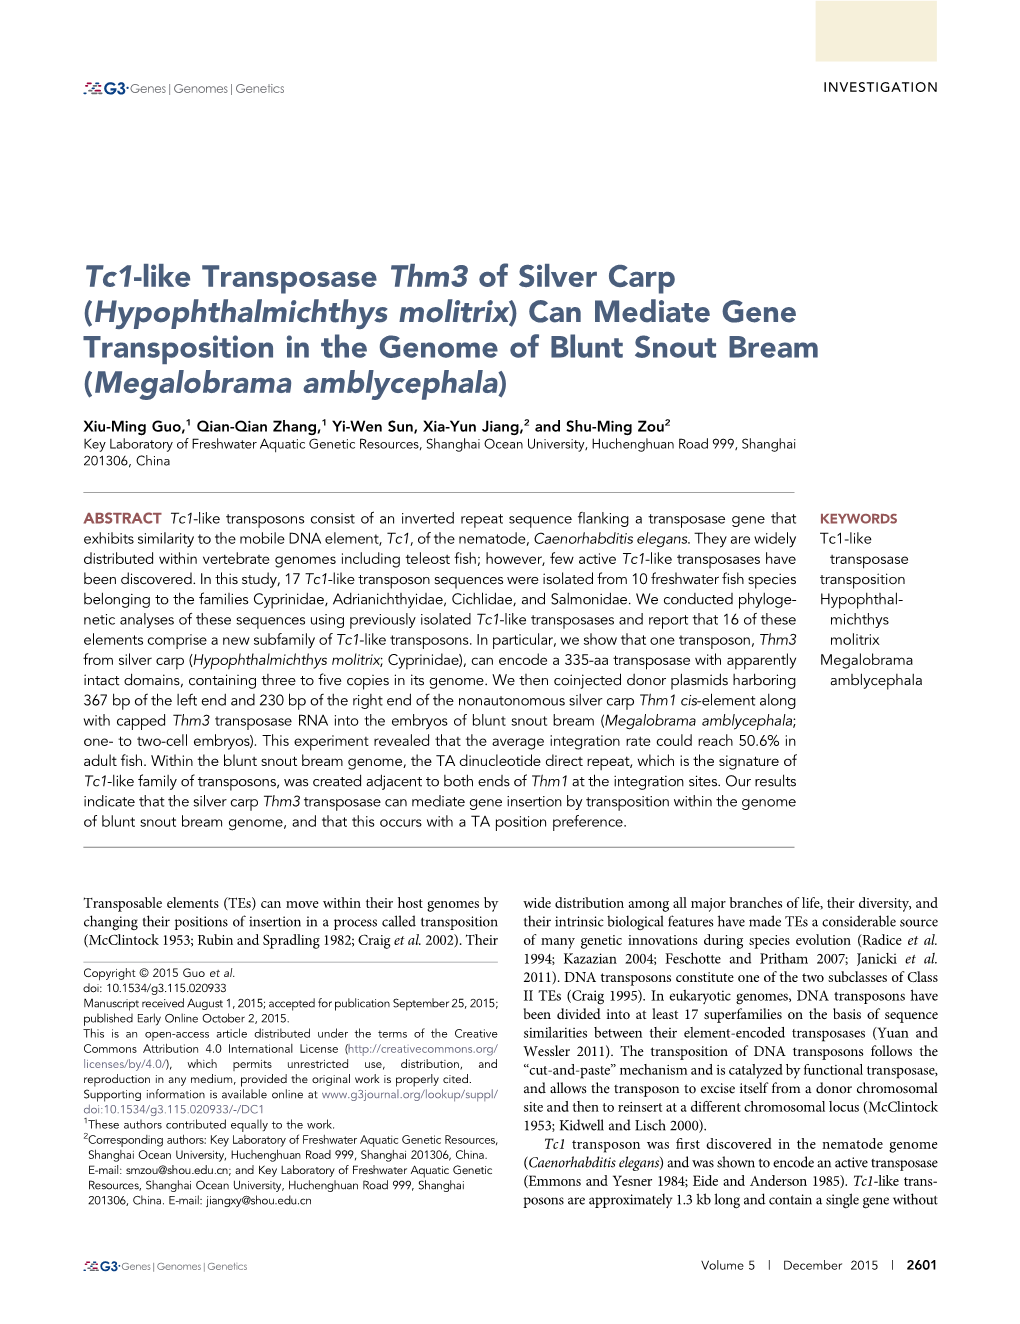 Tc1-Like Transposase Thm3 of Silver Carp (Hypophthalmichthys Molitrix) Can Mediate Gene Transposition in the Genome of Blunt Snout Bream (Megalobrama Amblycephala)